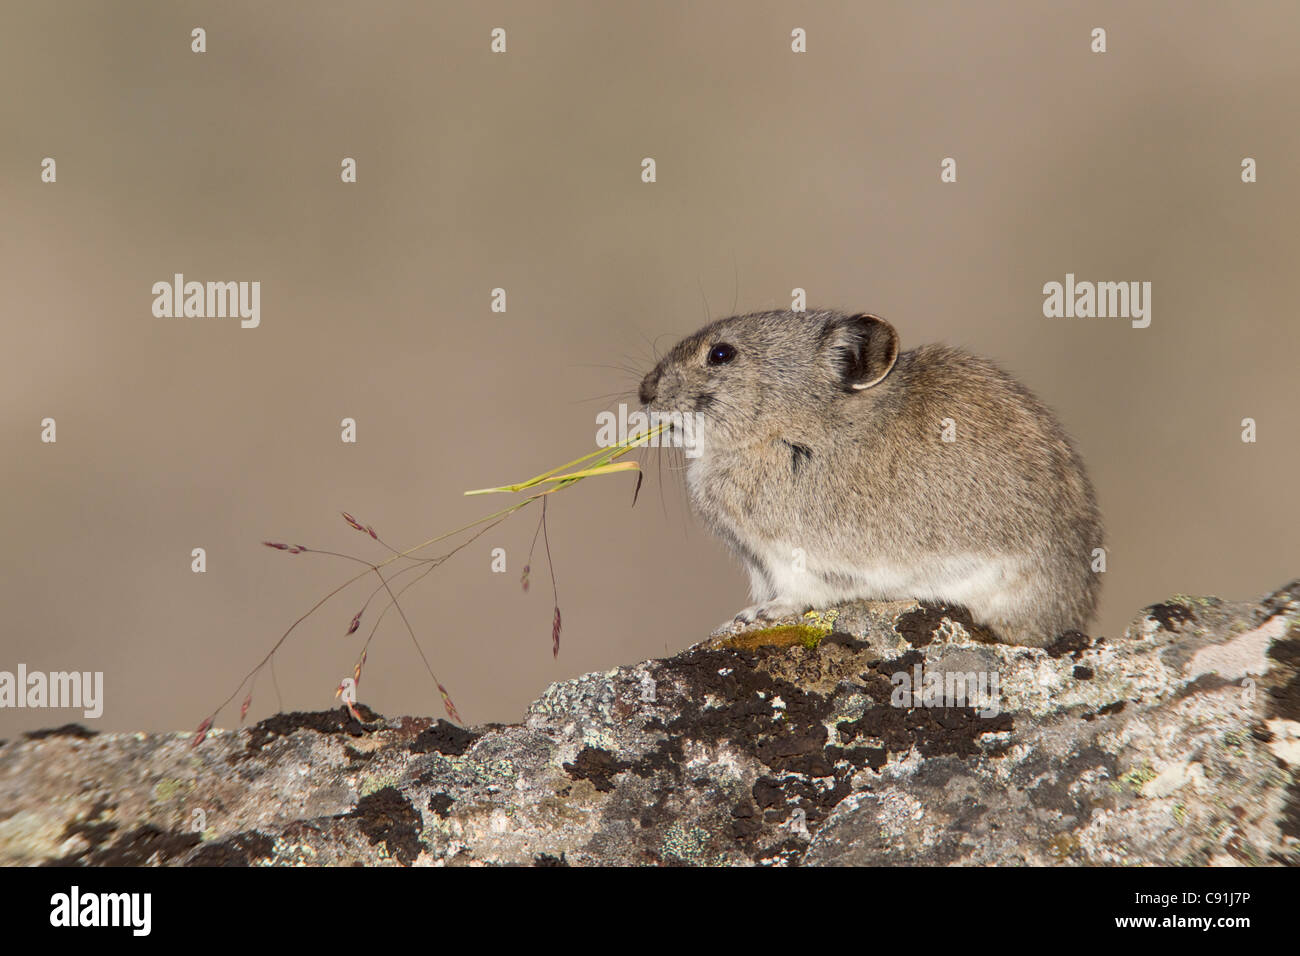 Collared Pika sitting on a lichen covered rock eating a grass stalk, Hatcher Pass, Talkeetna Mountains, Southcentral Alaska Stock Photo